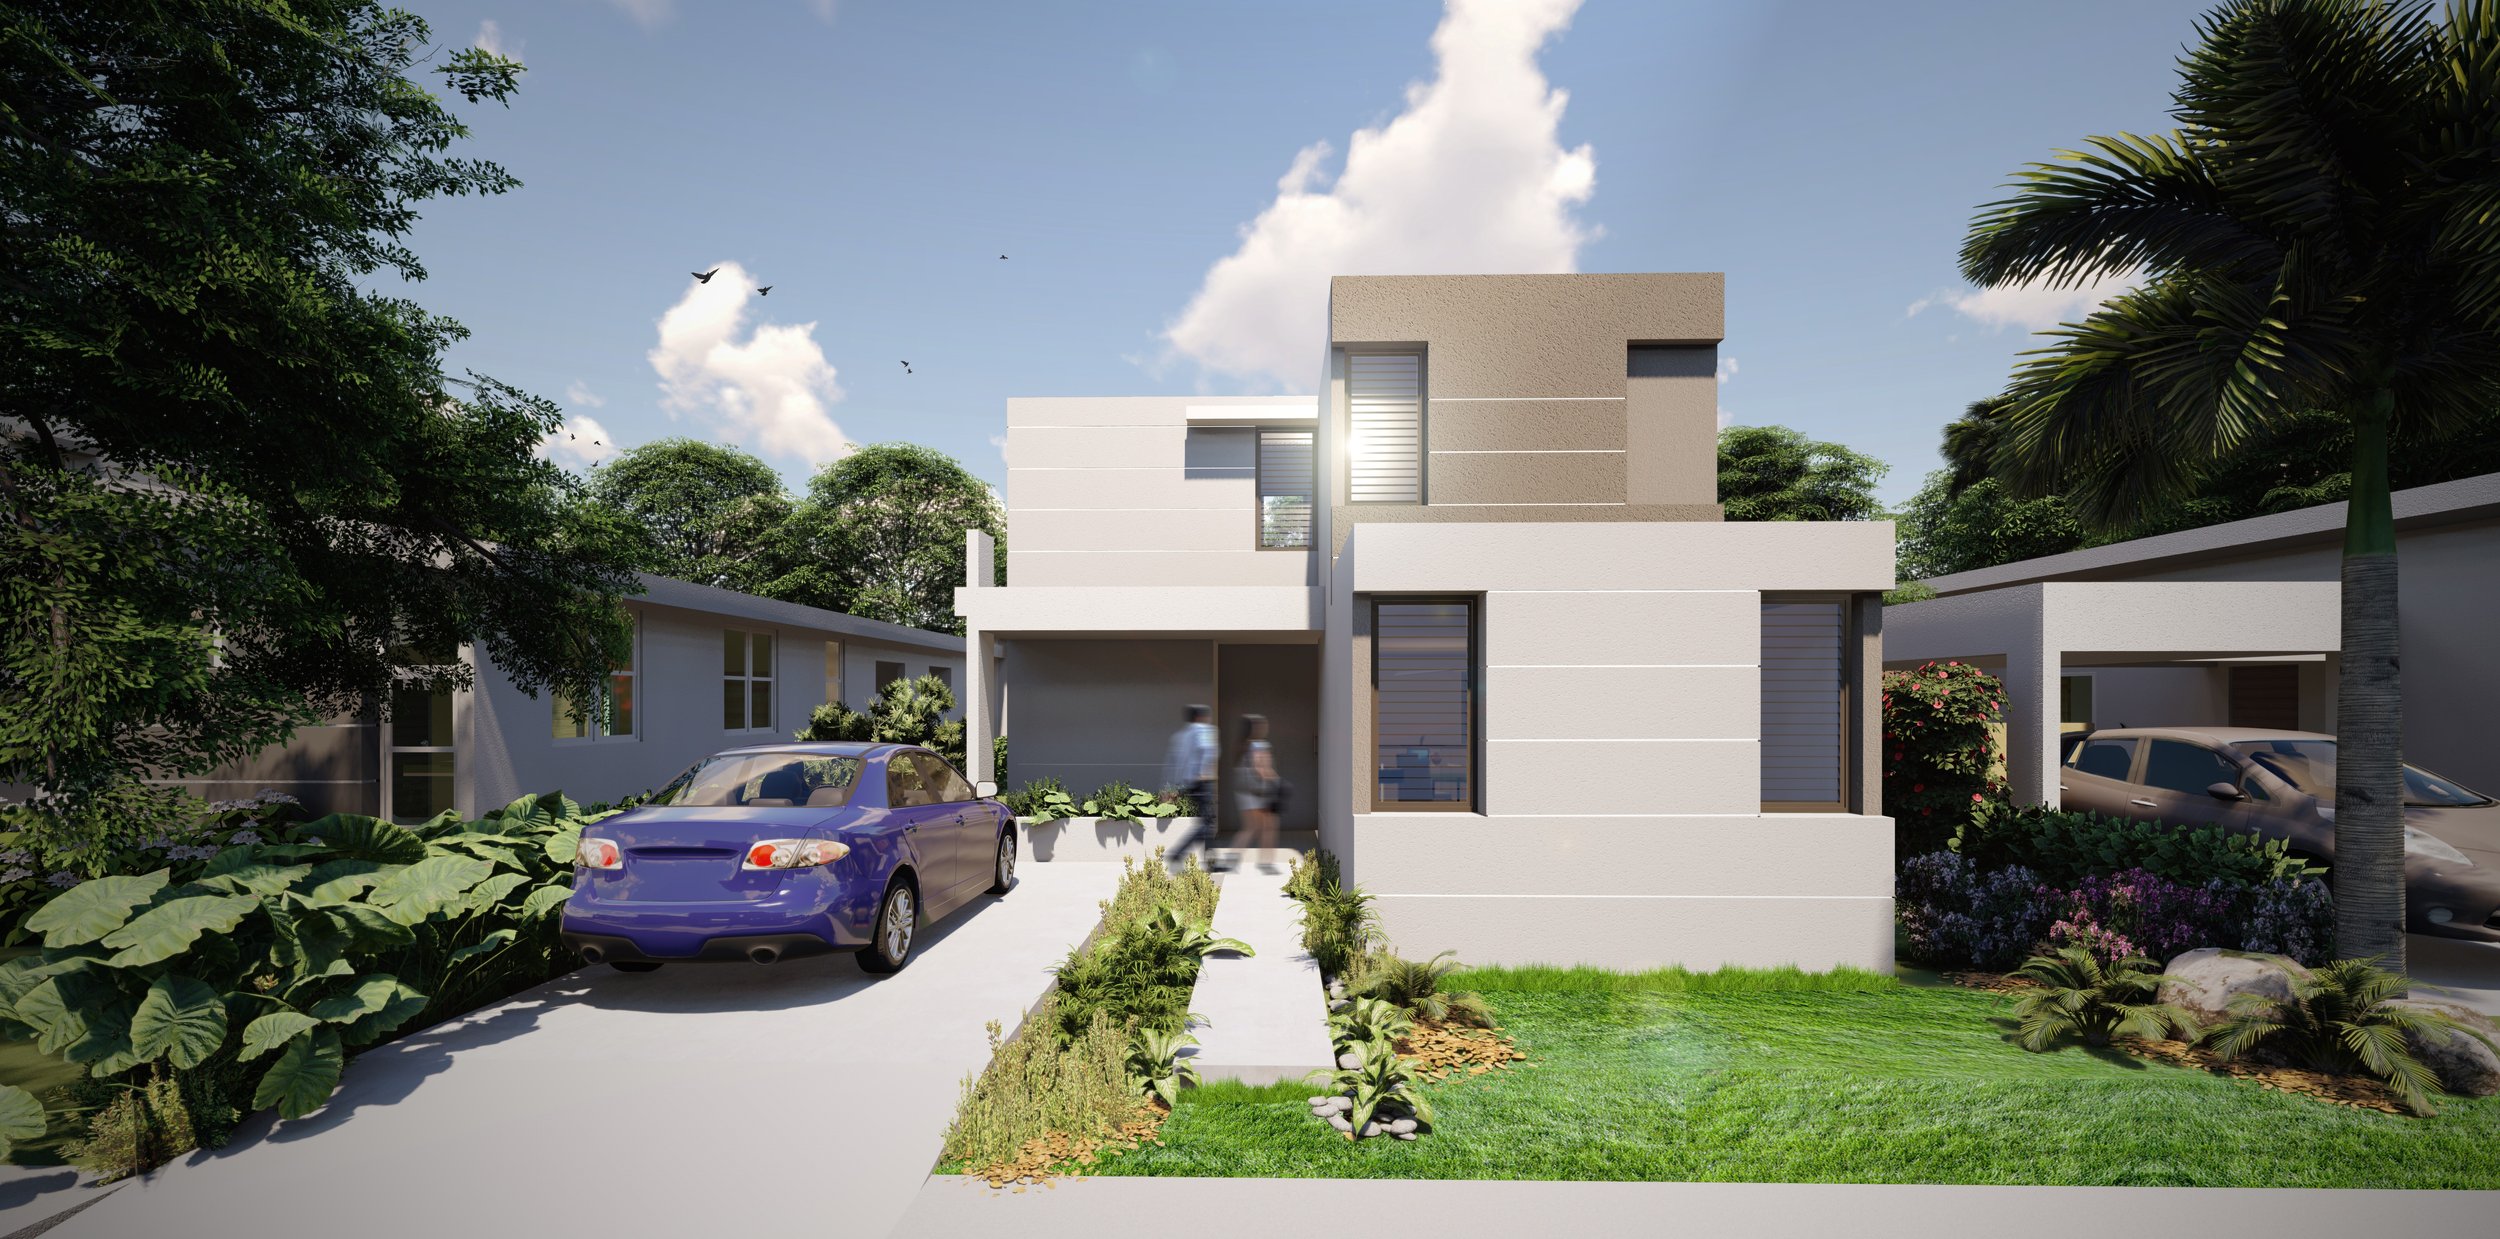  Conceptual rendering of an R3 house. 